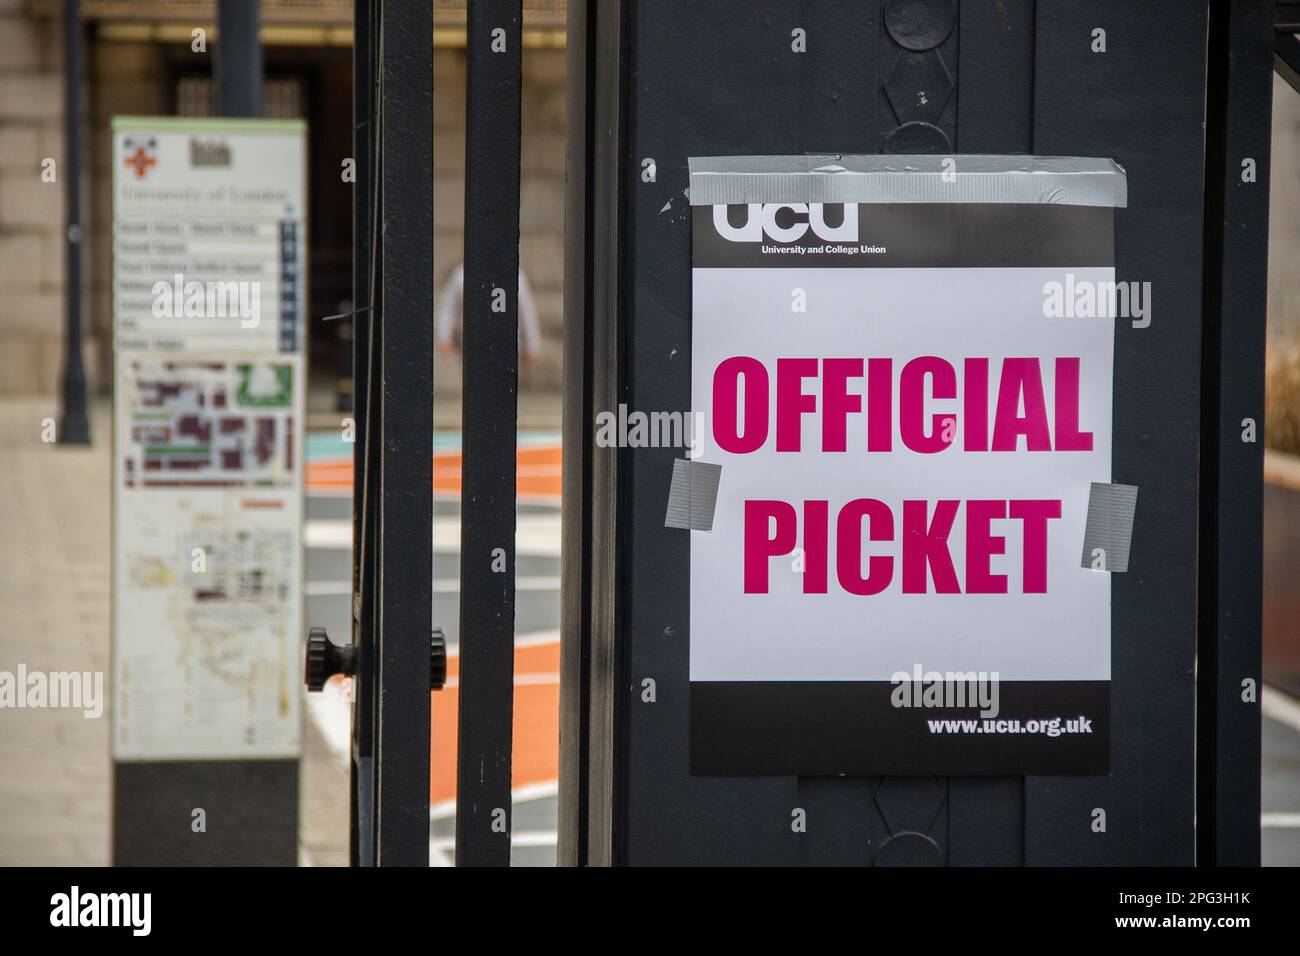 London, UK - 20 March 2023: Staff from the University of London—SOAS and Birkbeck—are currently on strike and holding official pickets in support of fair pay. Today, 150 universities and colleges across the UK, represented by UCU, are participating in the strike action. Credit: Sinai Noor/Alamy Live News Stock Photo